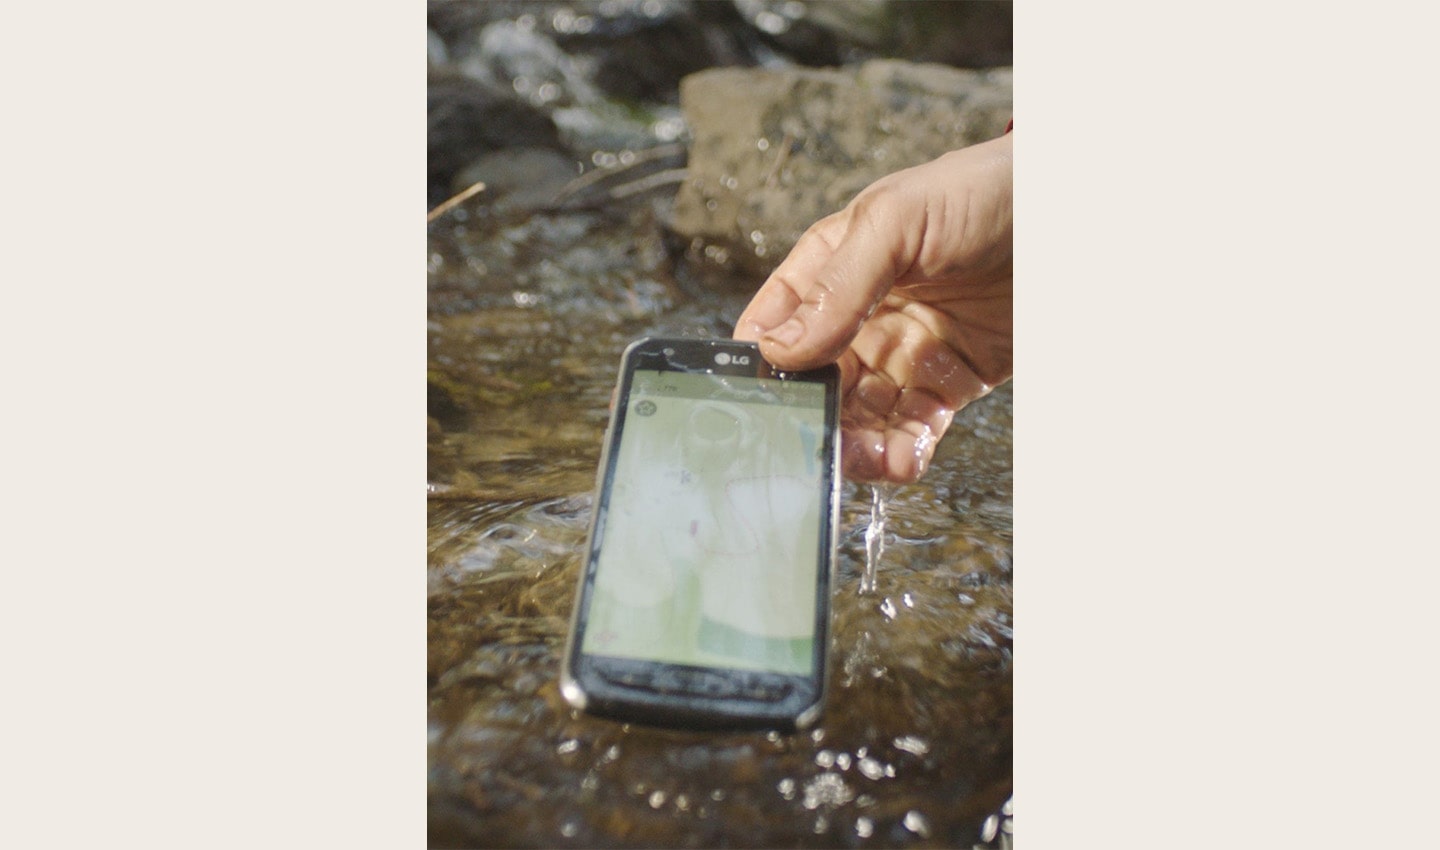 A hand lifting the water-resistant LG X Venture smartphone from water, the phone is still turned on